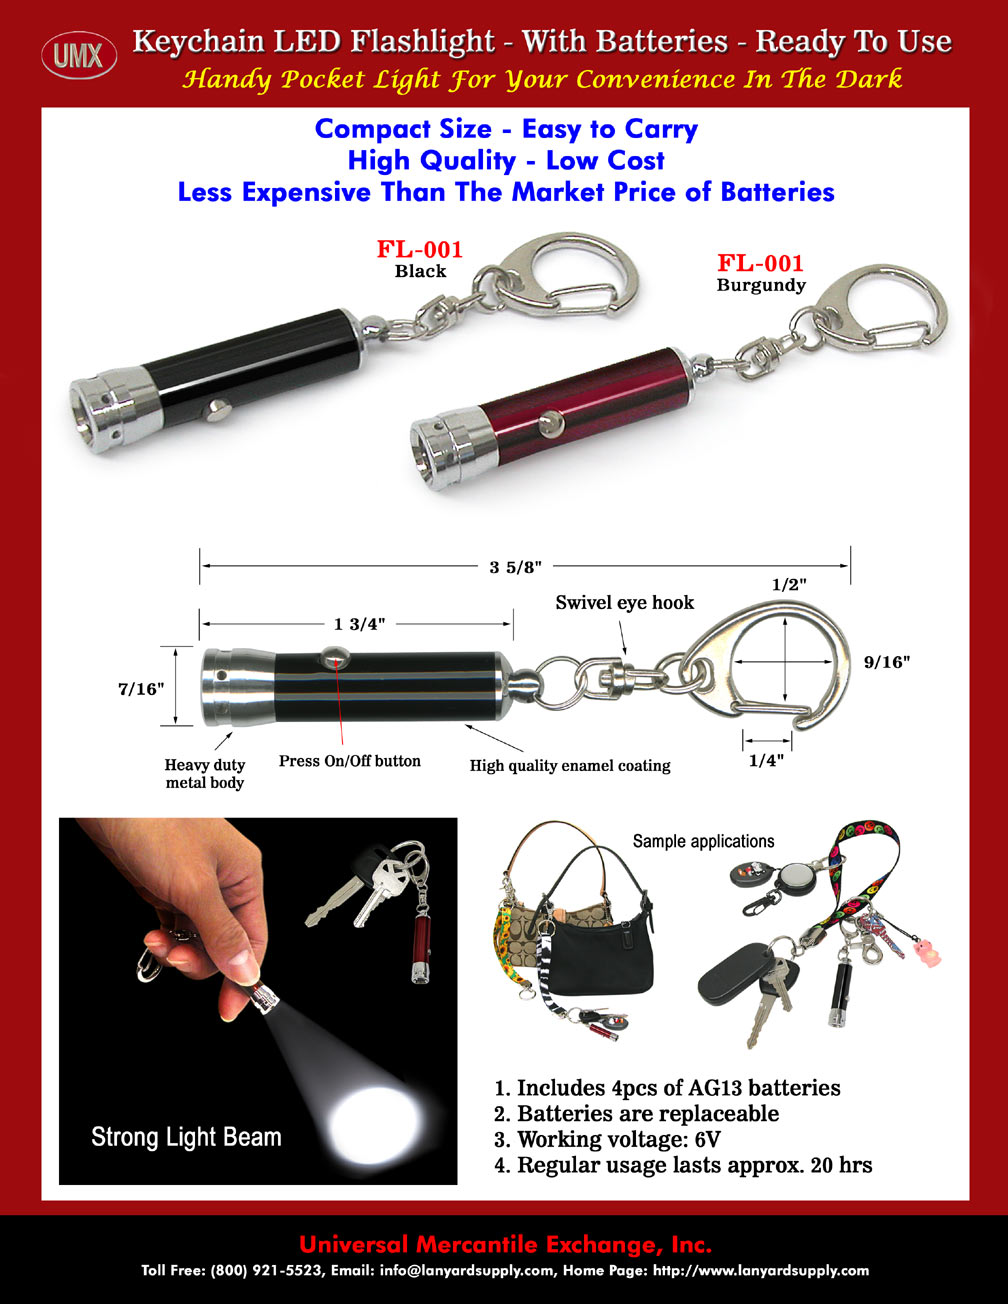 Compact Size Keychain Flashlights: A Great Add-on Flashlight For Keychains.